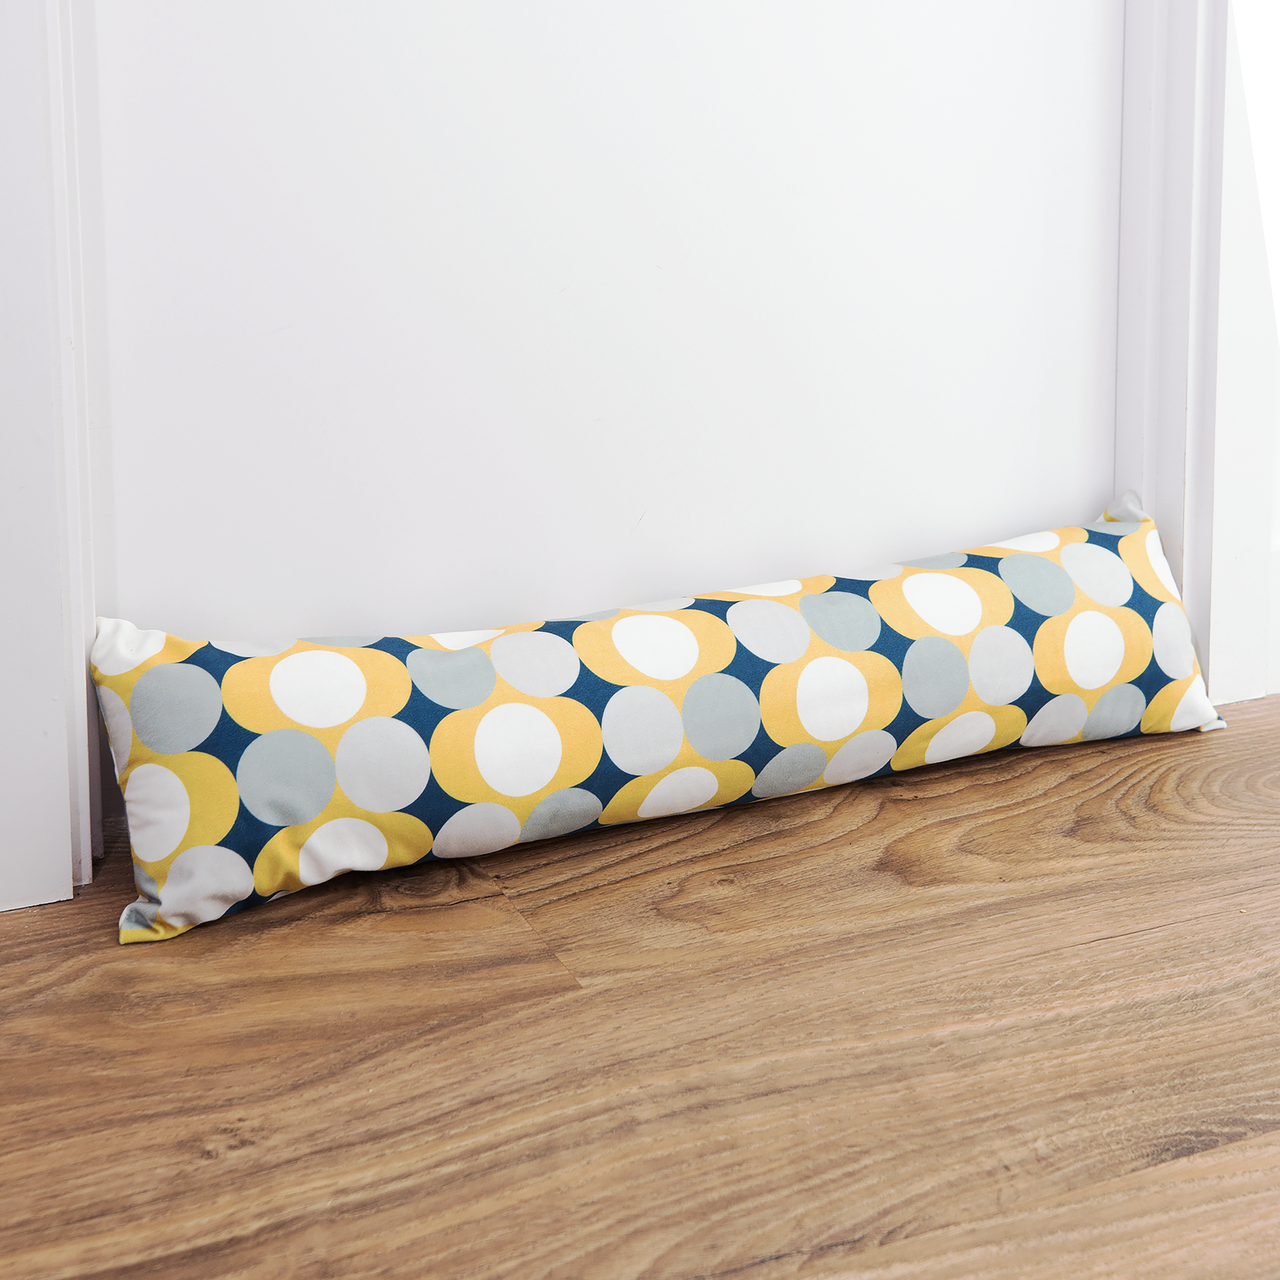 Celina Digby Luxury Velvet Draught Excluder – Dot Drops (Available in 2 Sizes) Extra Large (110cm length)